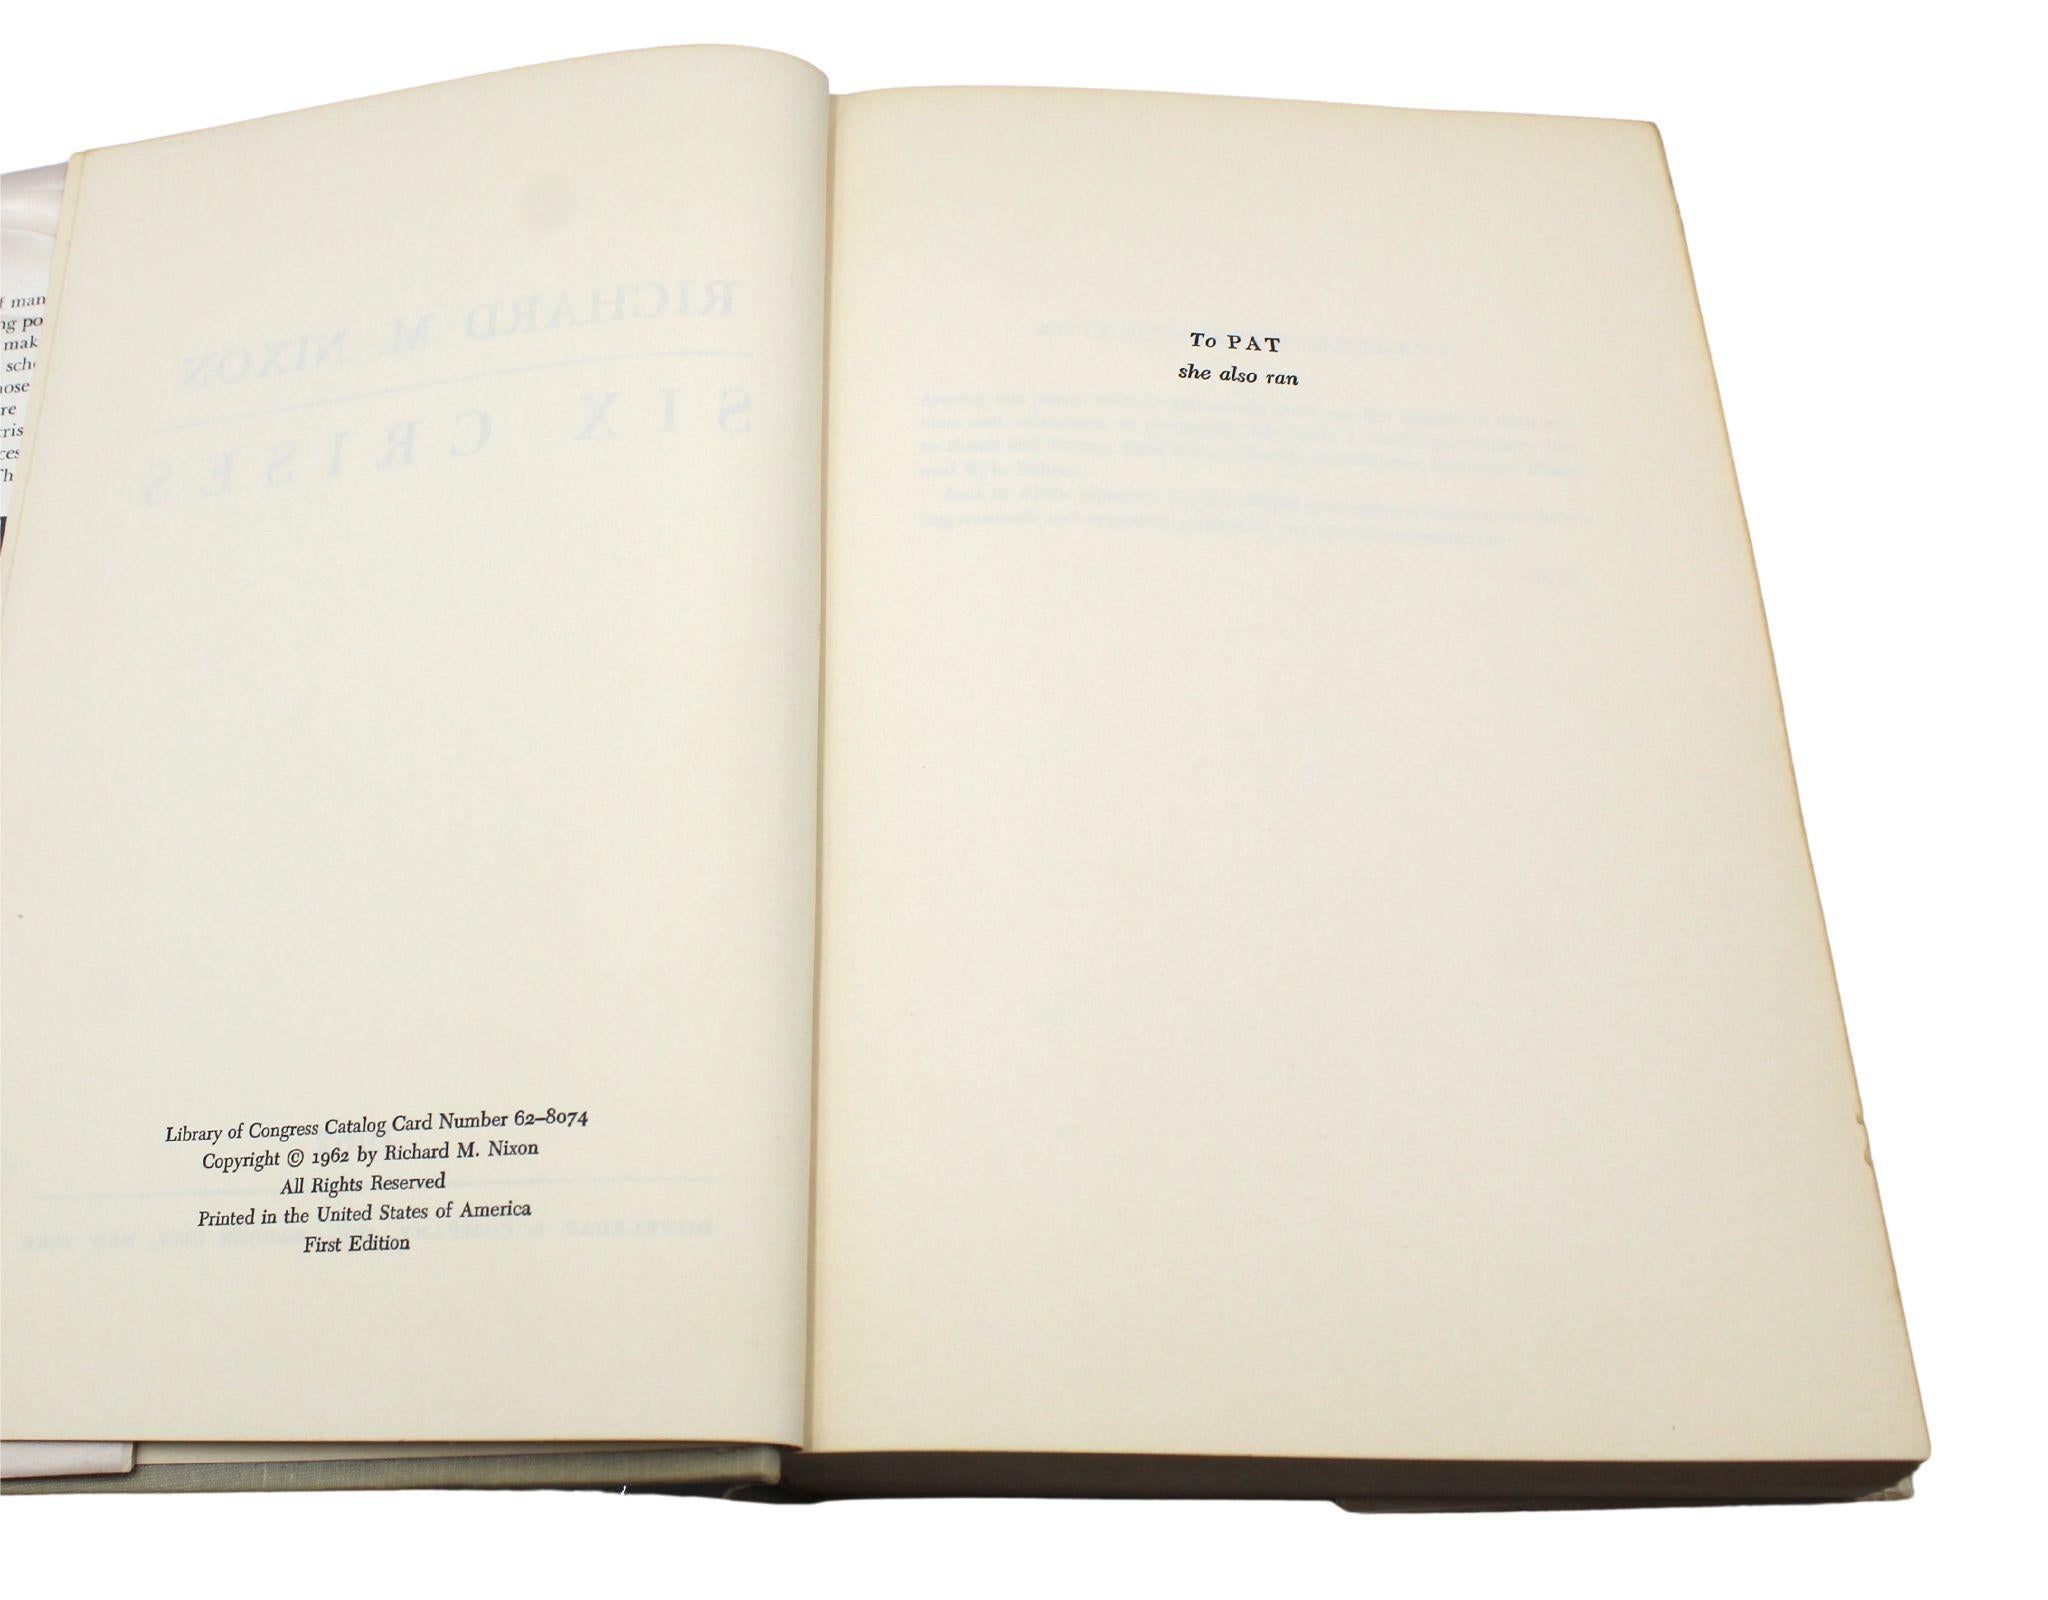 Six Crises, Signed by Richard Nixon, First Edition, 1962 For Sale 5